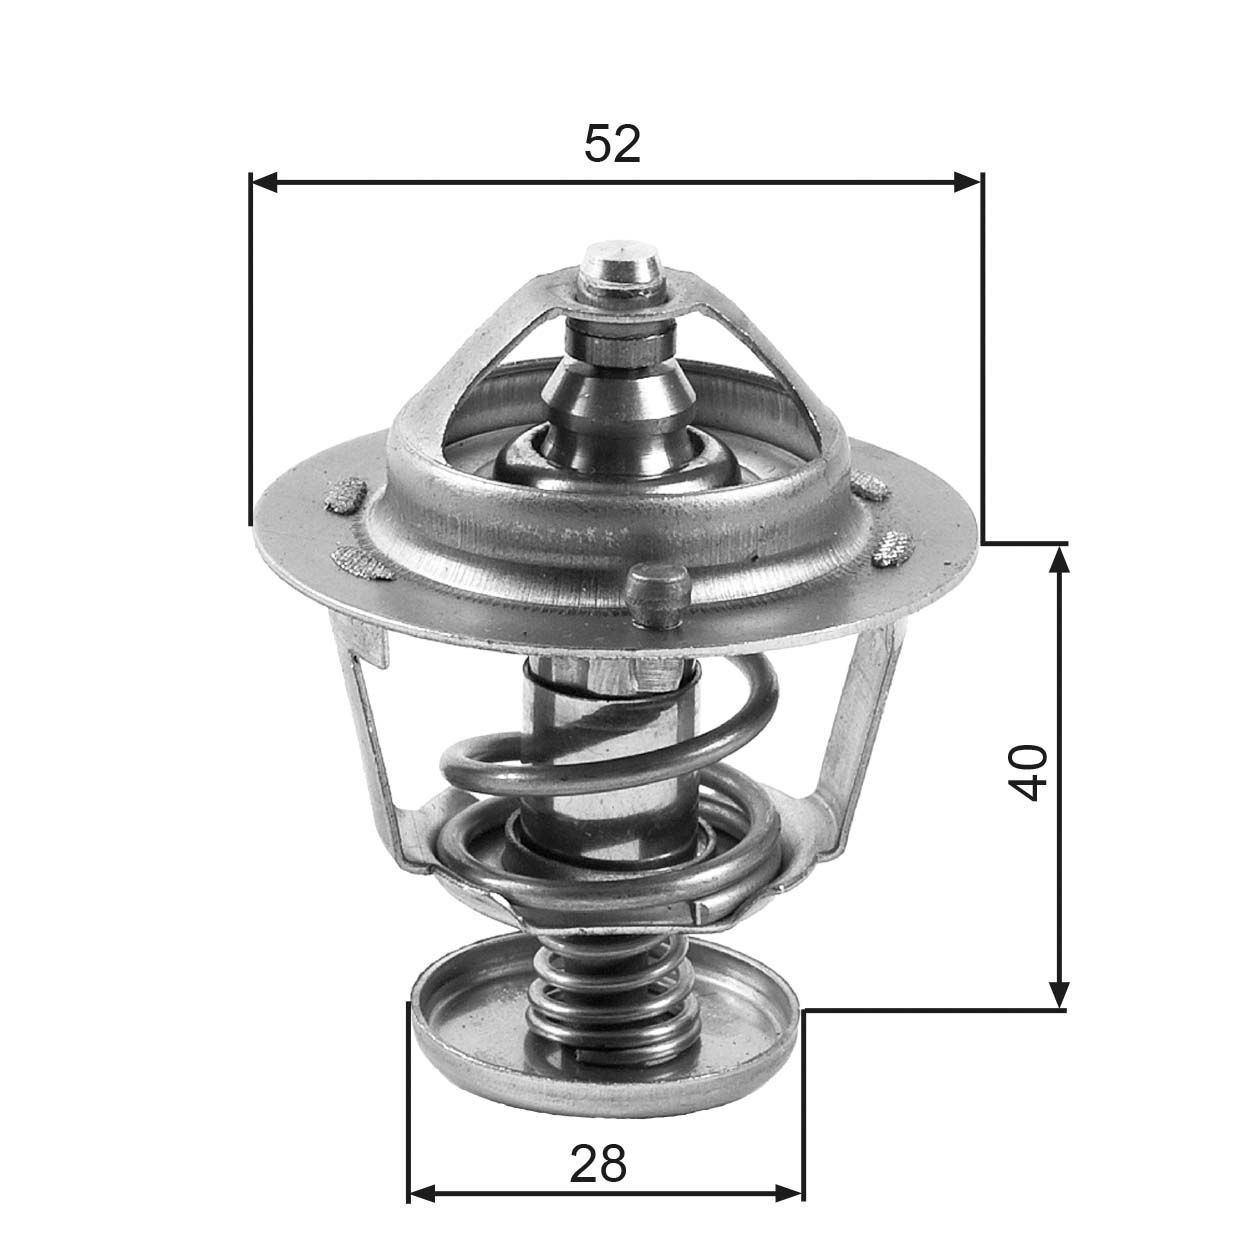 GATES TH24782G1 Engine thermostat Opening Temperature: 82°C, with gaskets/seals, without housing